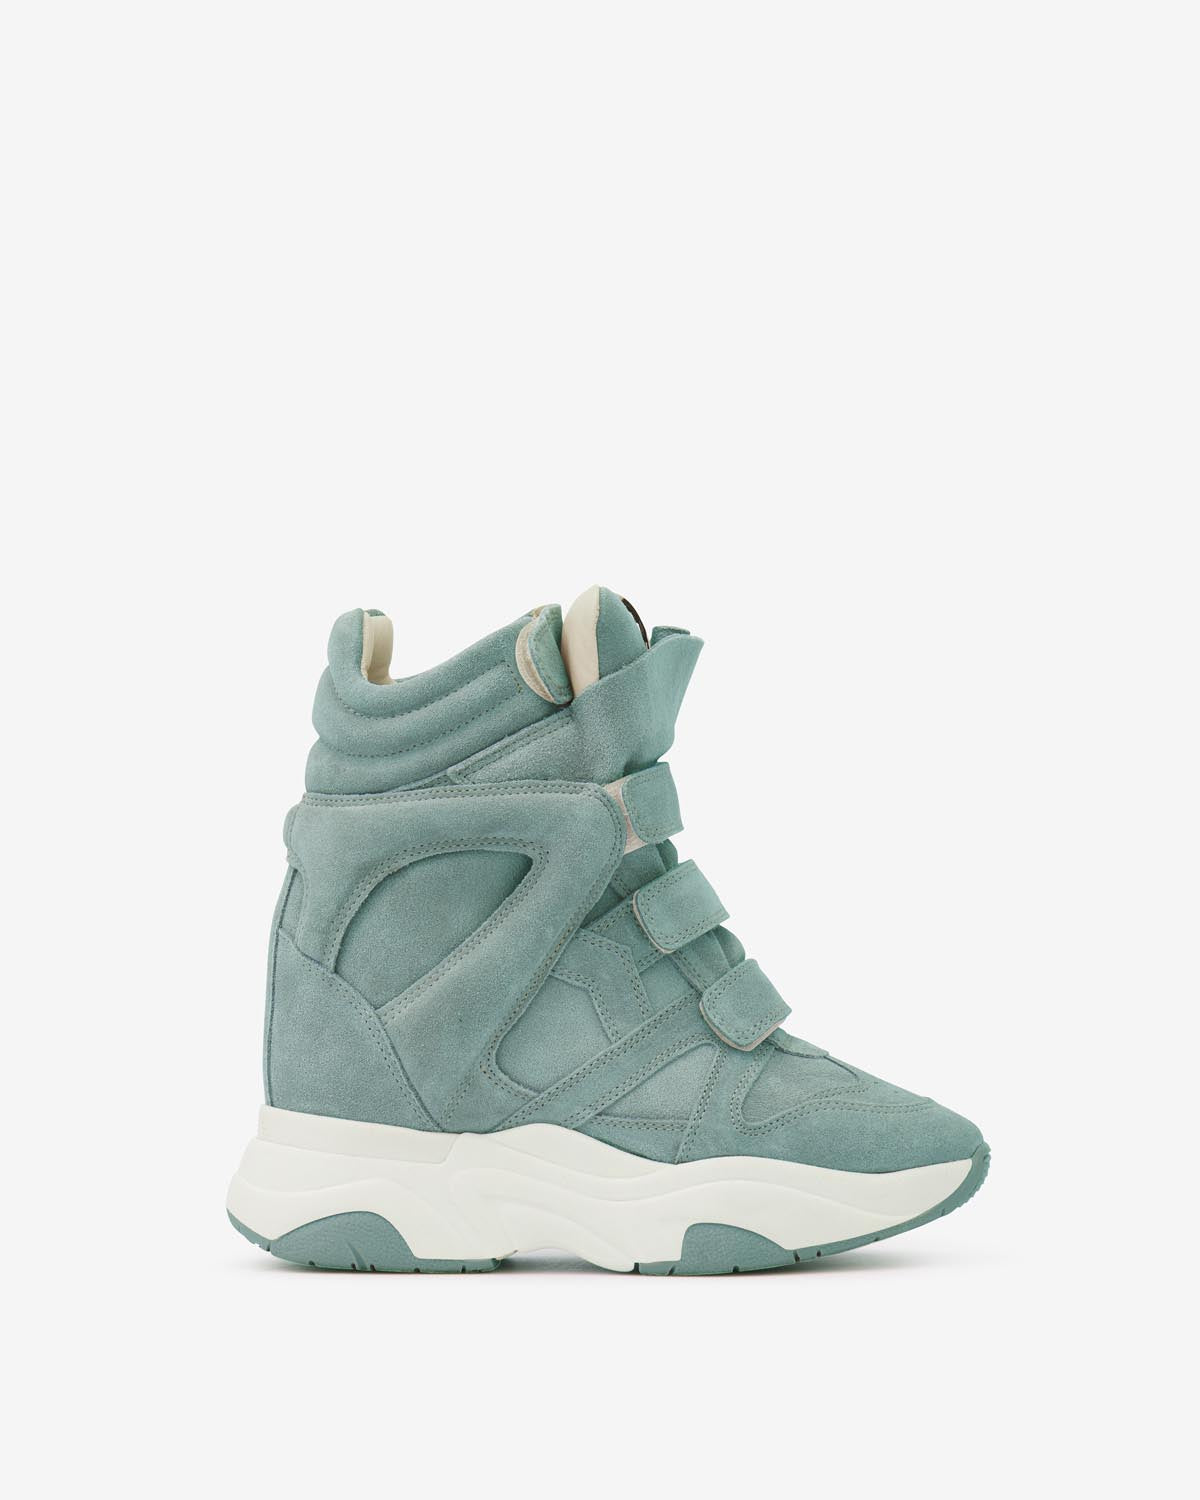 Sneakers Balskee Donna sea green | ISABEL MARANT Sito ufficiale